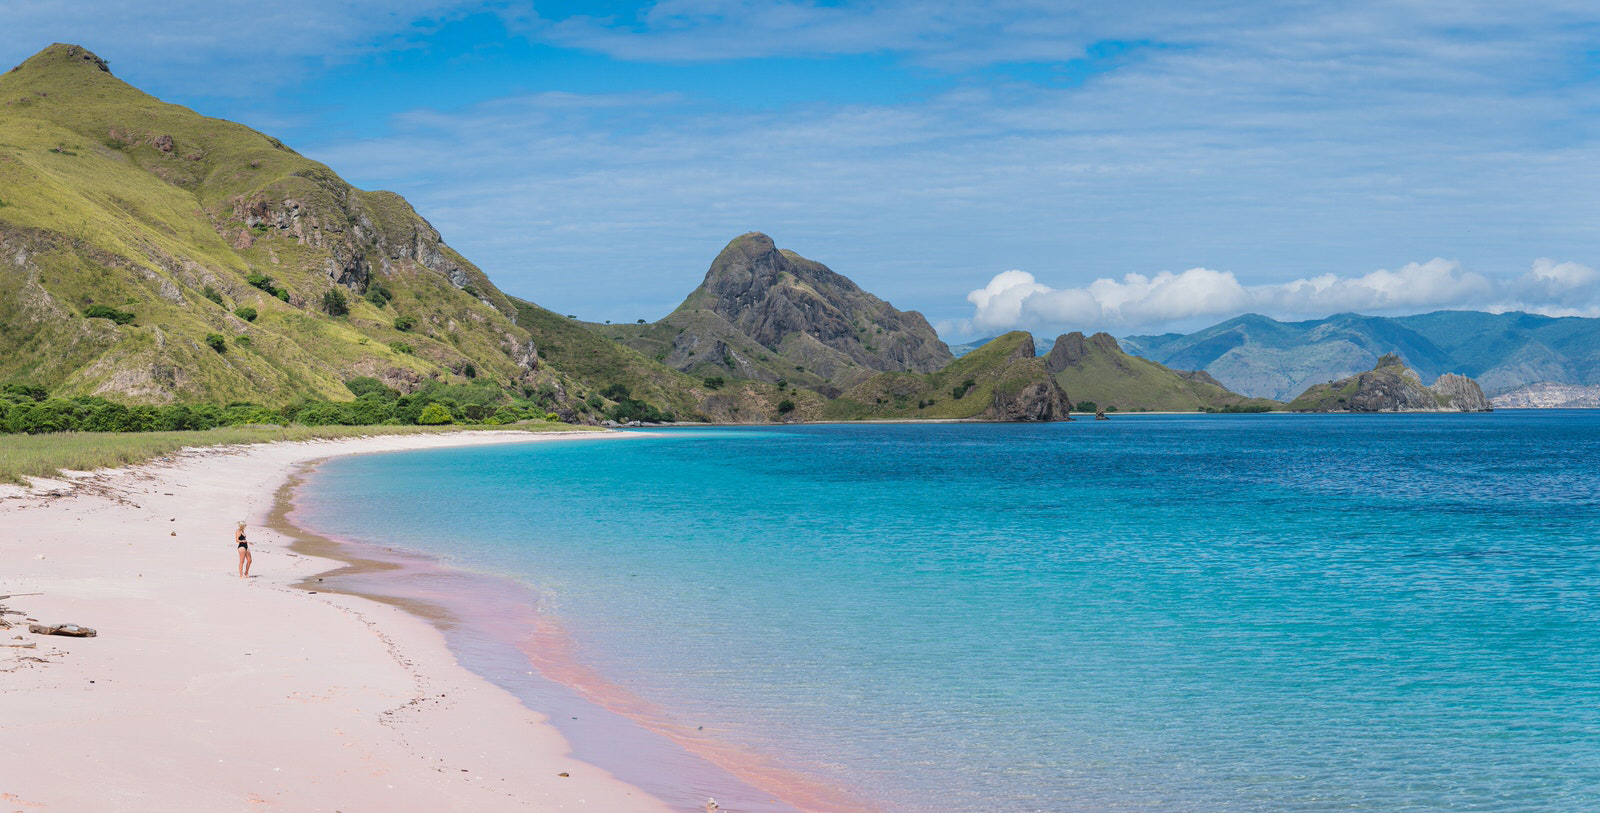 Pink Beach, also known as Pantai Merah, is a stunning natural wonder located on the island of Komodo in Indonesia. What makes this beach unique is its pink sand, which is a result of a mixture of white sand and red coral fragments. The beach is not only beautiful but also offers a variety of water activities, making it a must-visit destination for travelers who are looking for a unique and memorable experience.